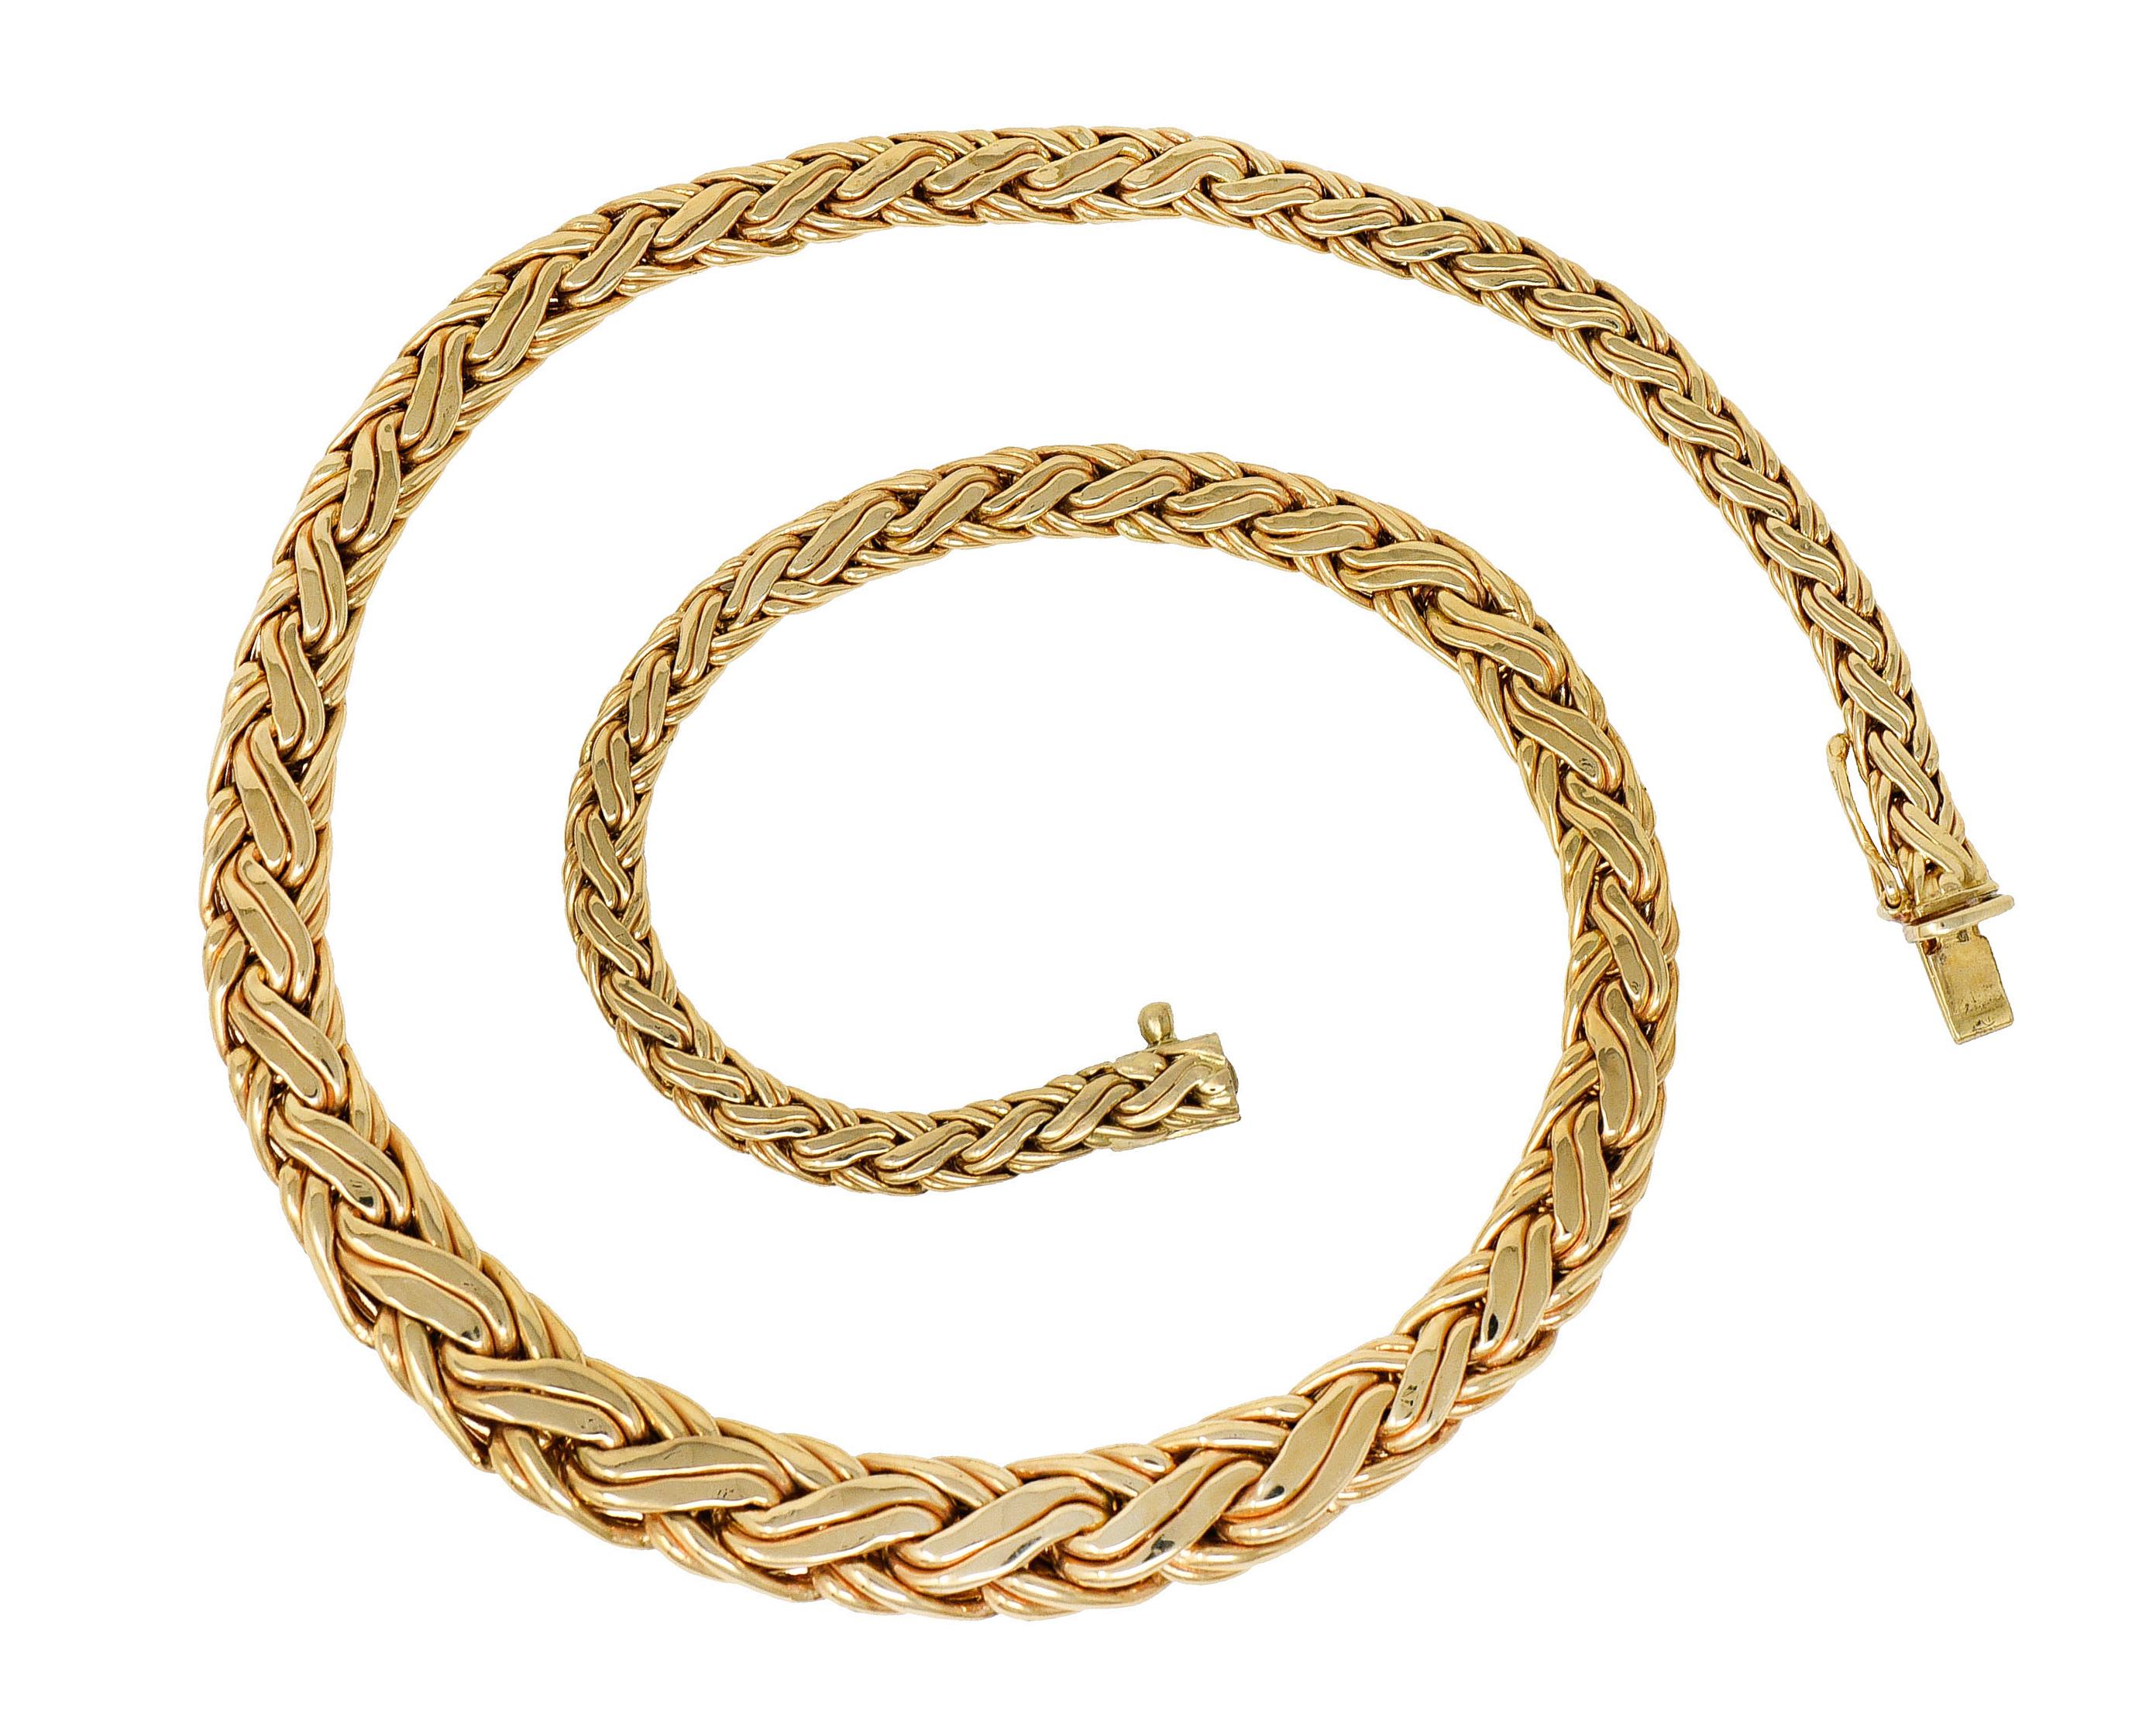 Wheat chain necklace is comprised of intricately woven links

Brightly polished and graduating in thickness

Completed by a concealed clasp with a figure eight safety

Stamped 585 for 14 karat gold

Fully signed Tiffany & Co.

Circa: 1980s

Length: